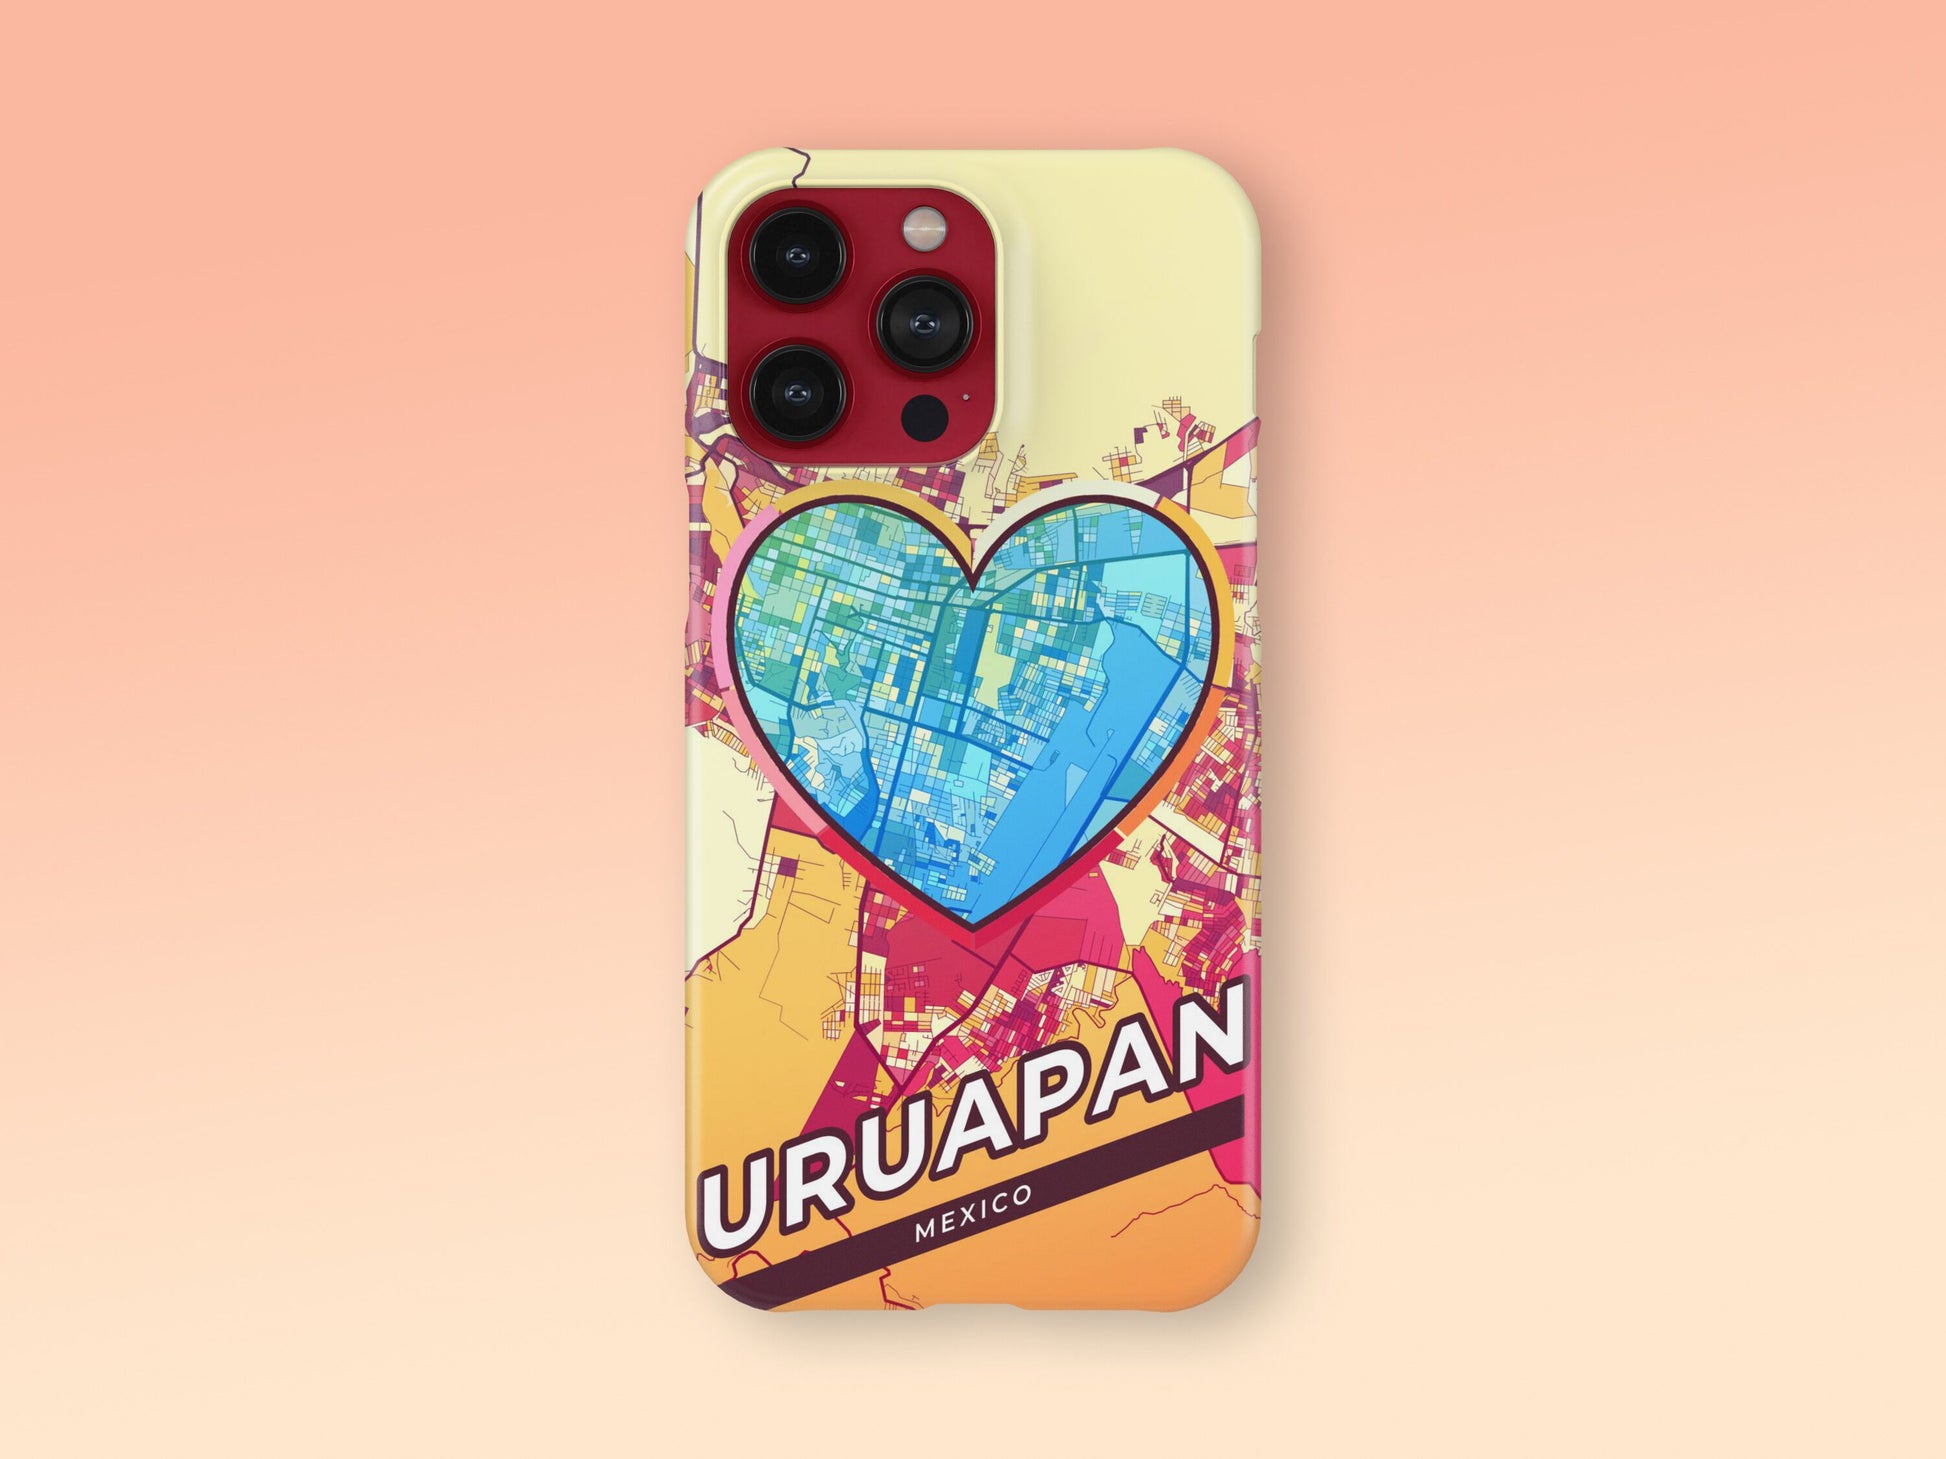 Uruapan Mexico slim phone case with colorful icon 2